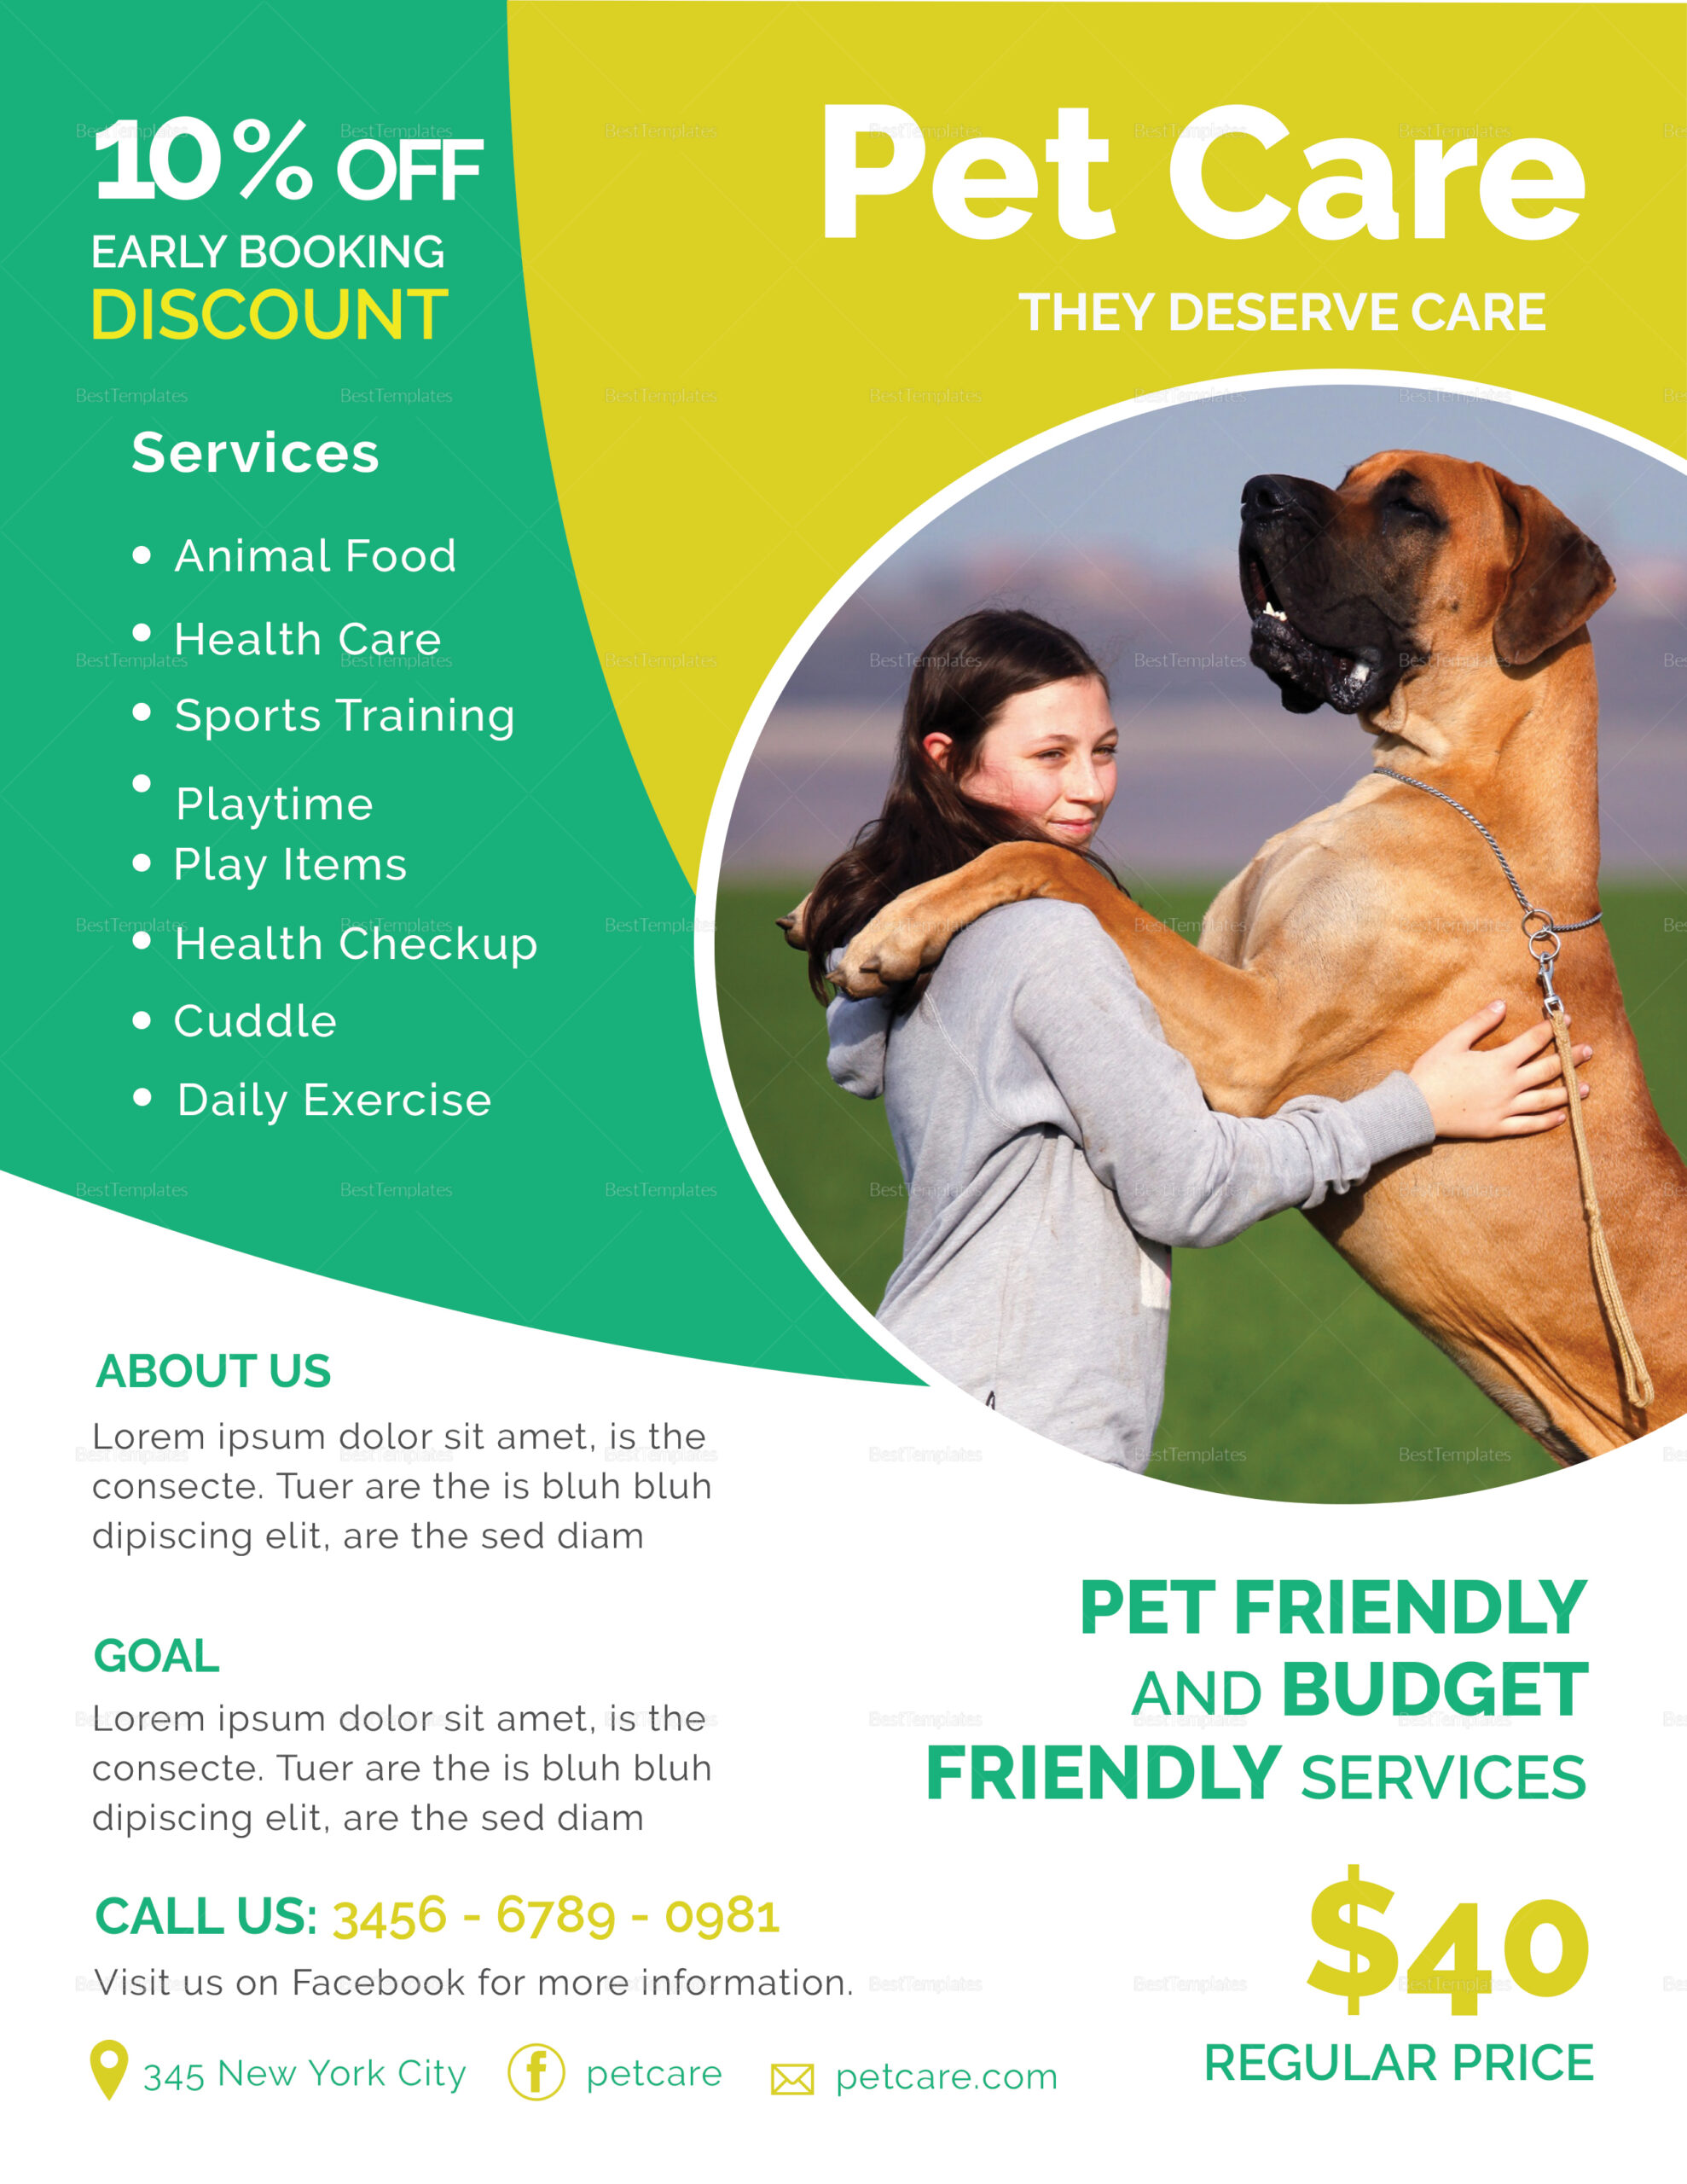 Pet Care Services Flyer Template Intended For Dog Sitting Flyer Template In Dog Sitting Flyer Template